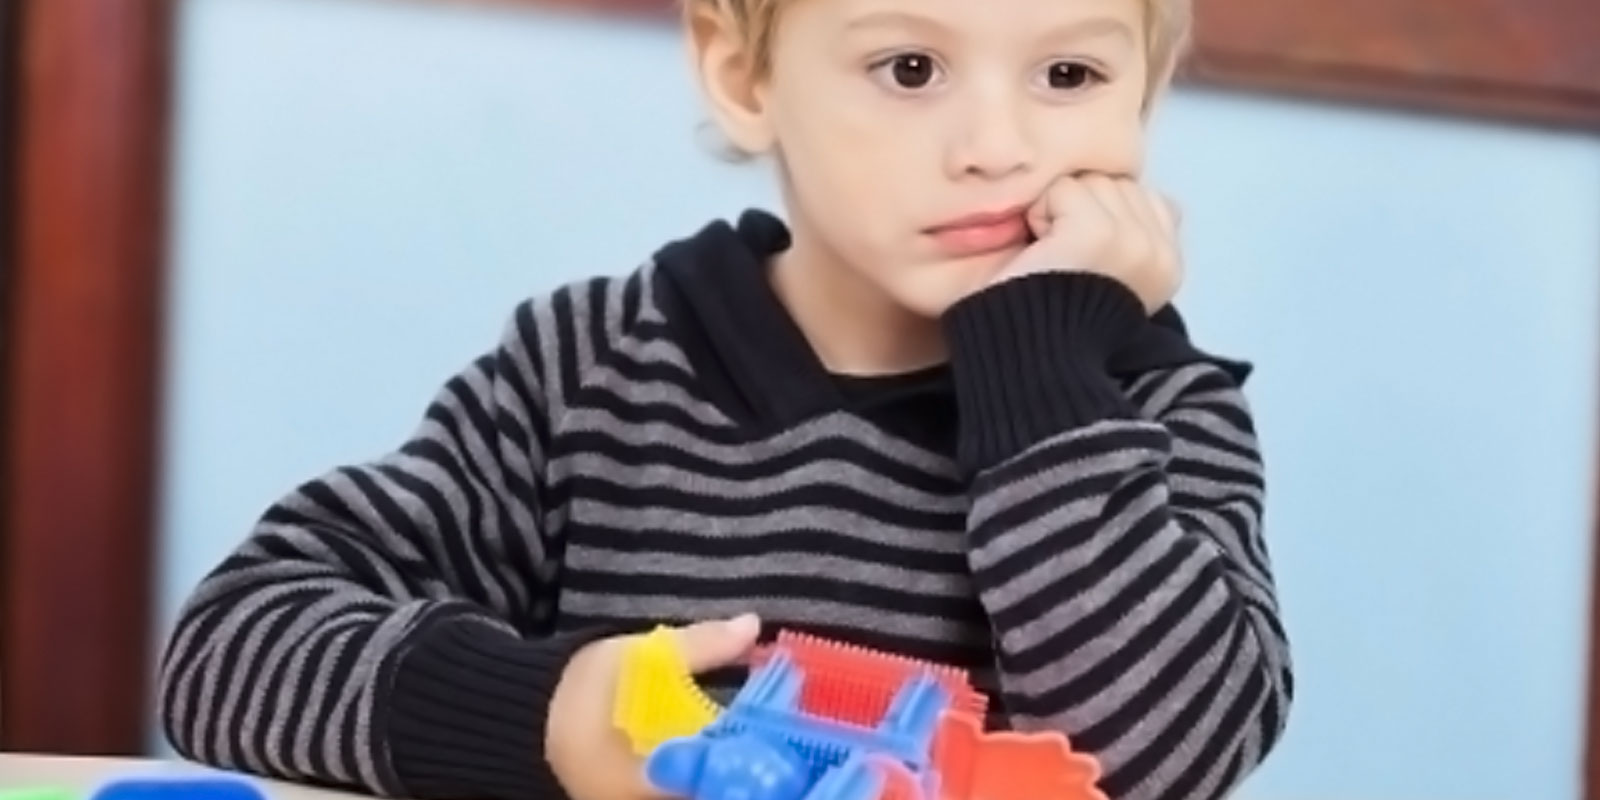 10 Signs Your Child Is Experiencing Daycare Abuse